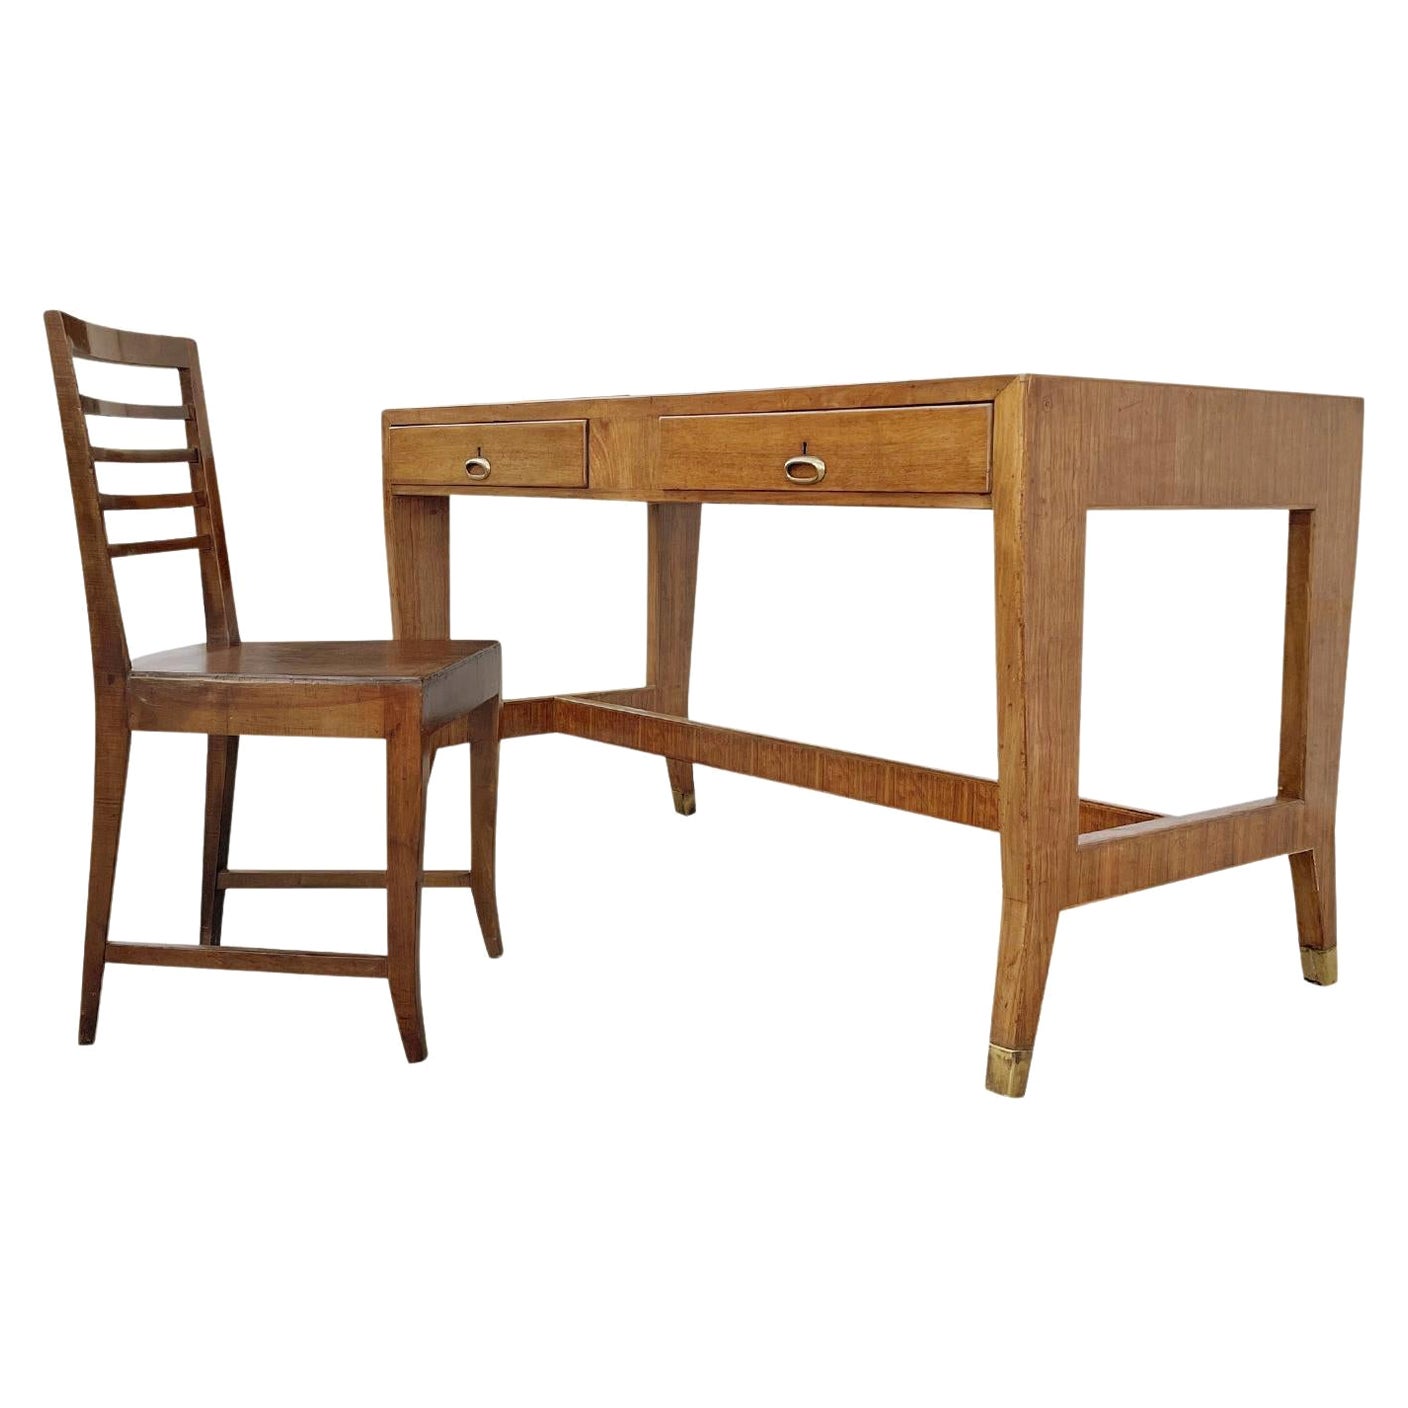 20th Century Italian Walnut Writing Table, Desk Set with a Chair by Gio Ponti For Sale